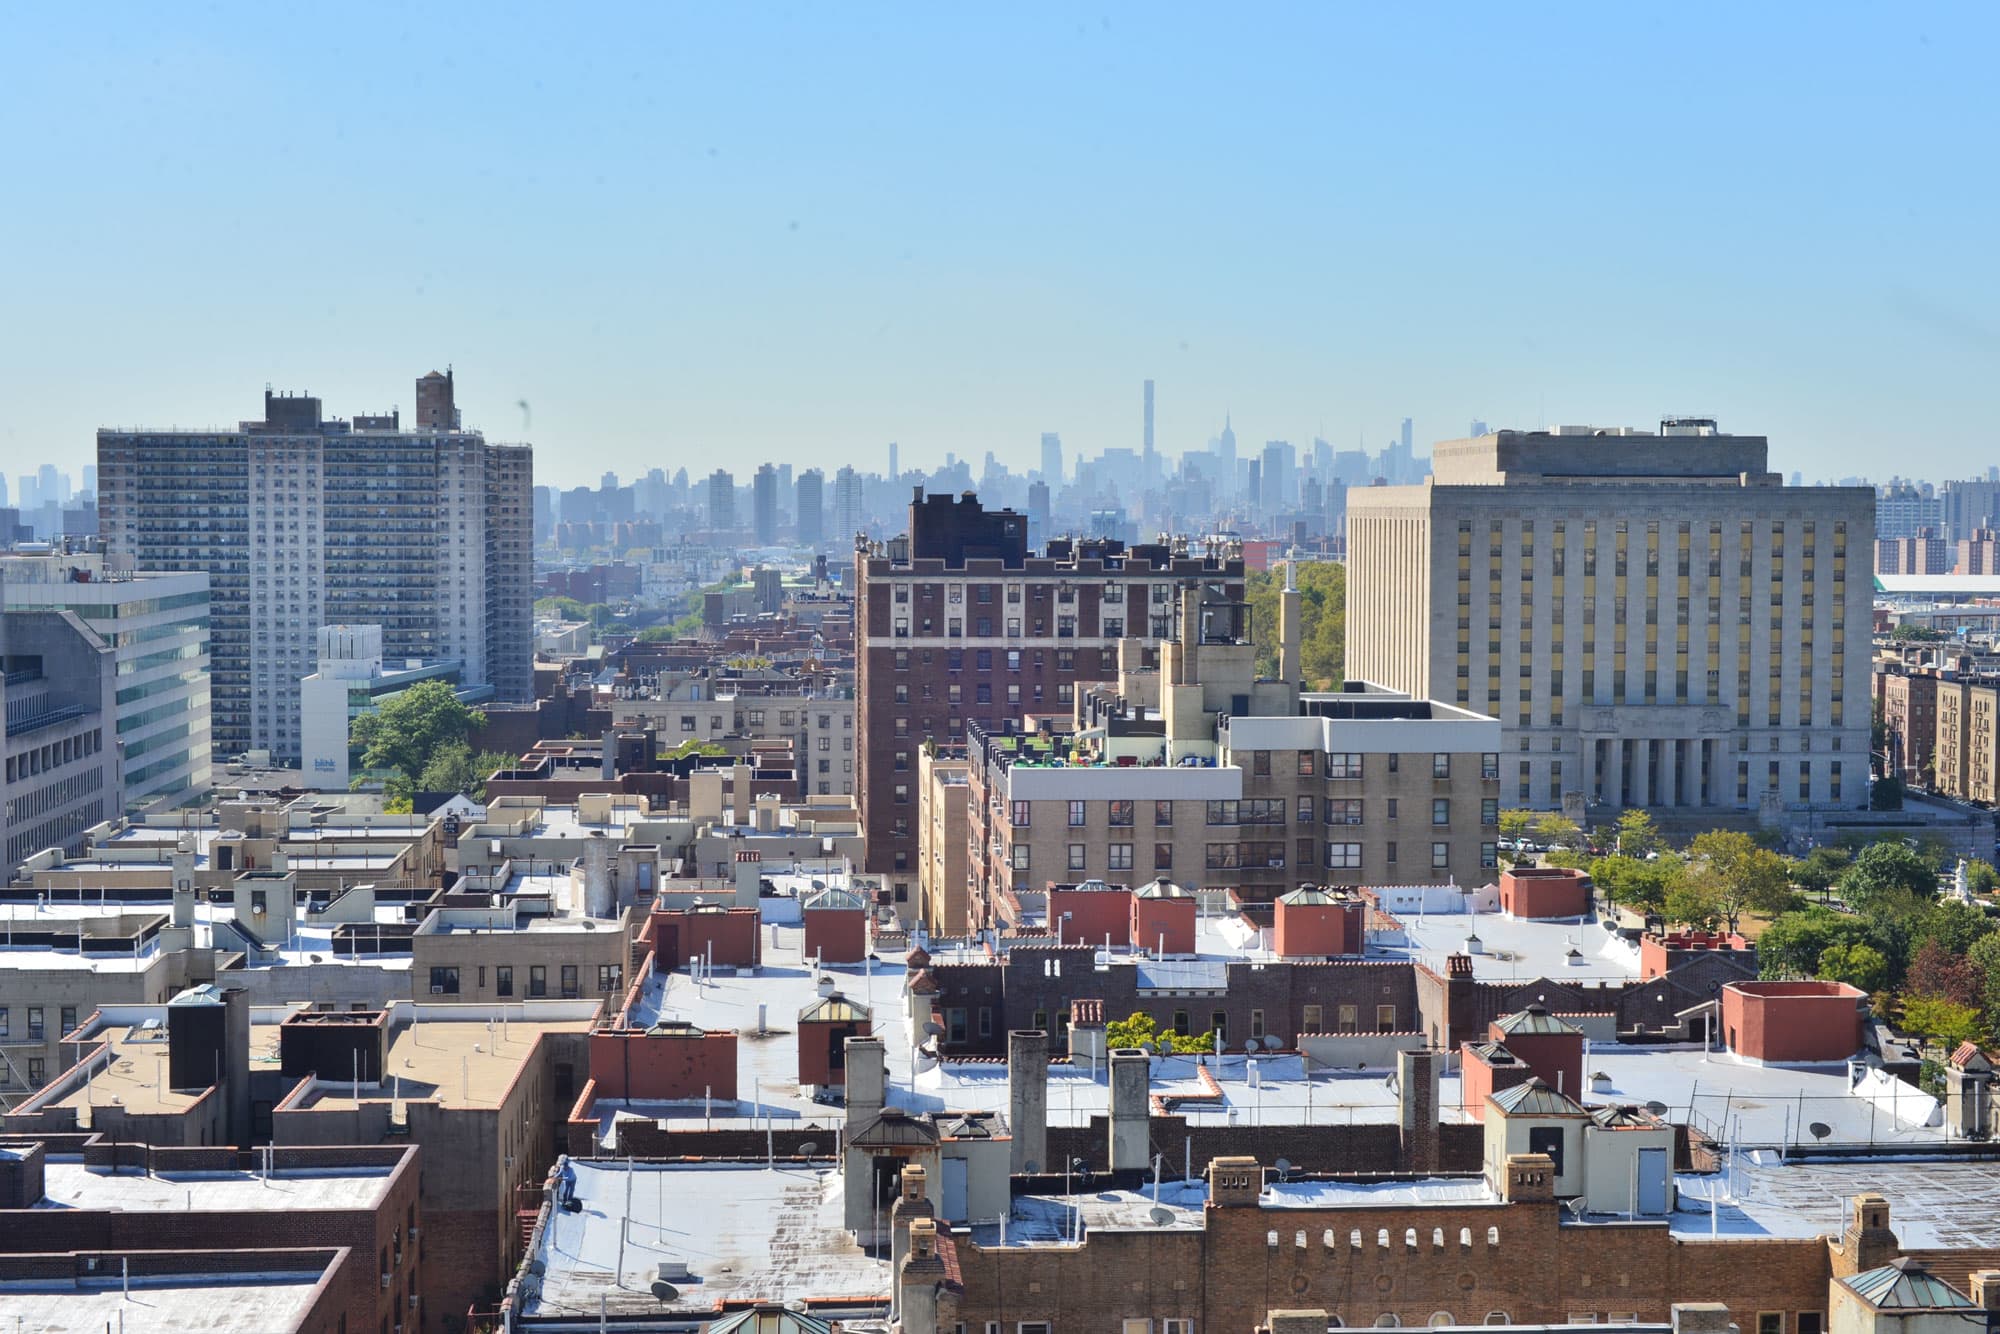 Bronx becomes latest target of NYC